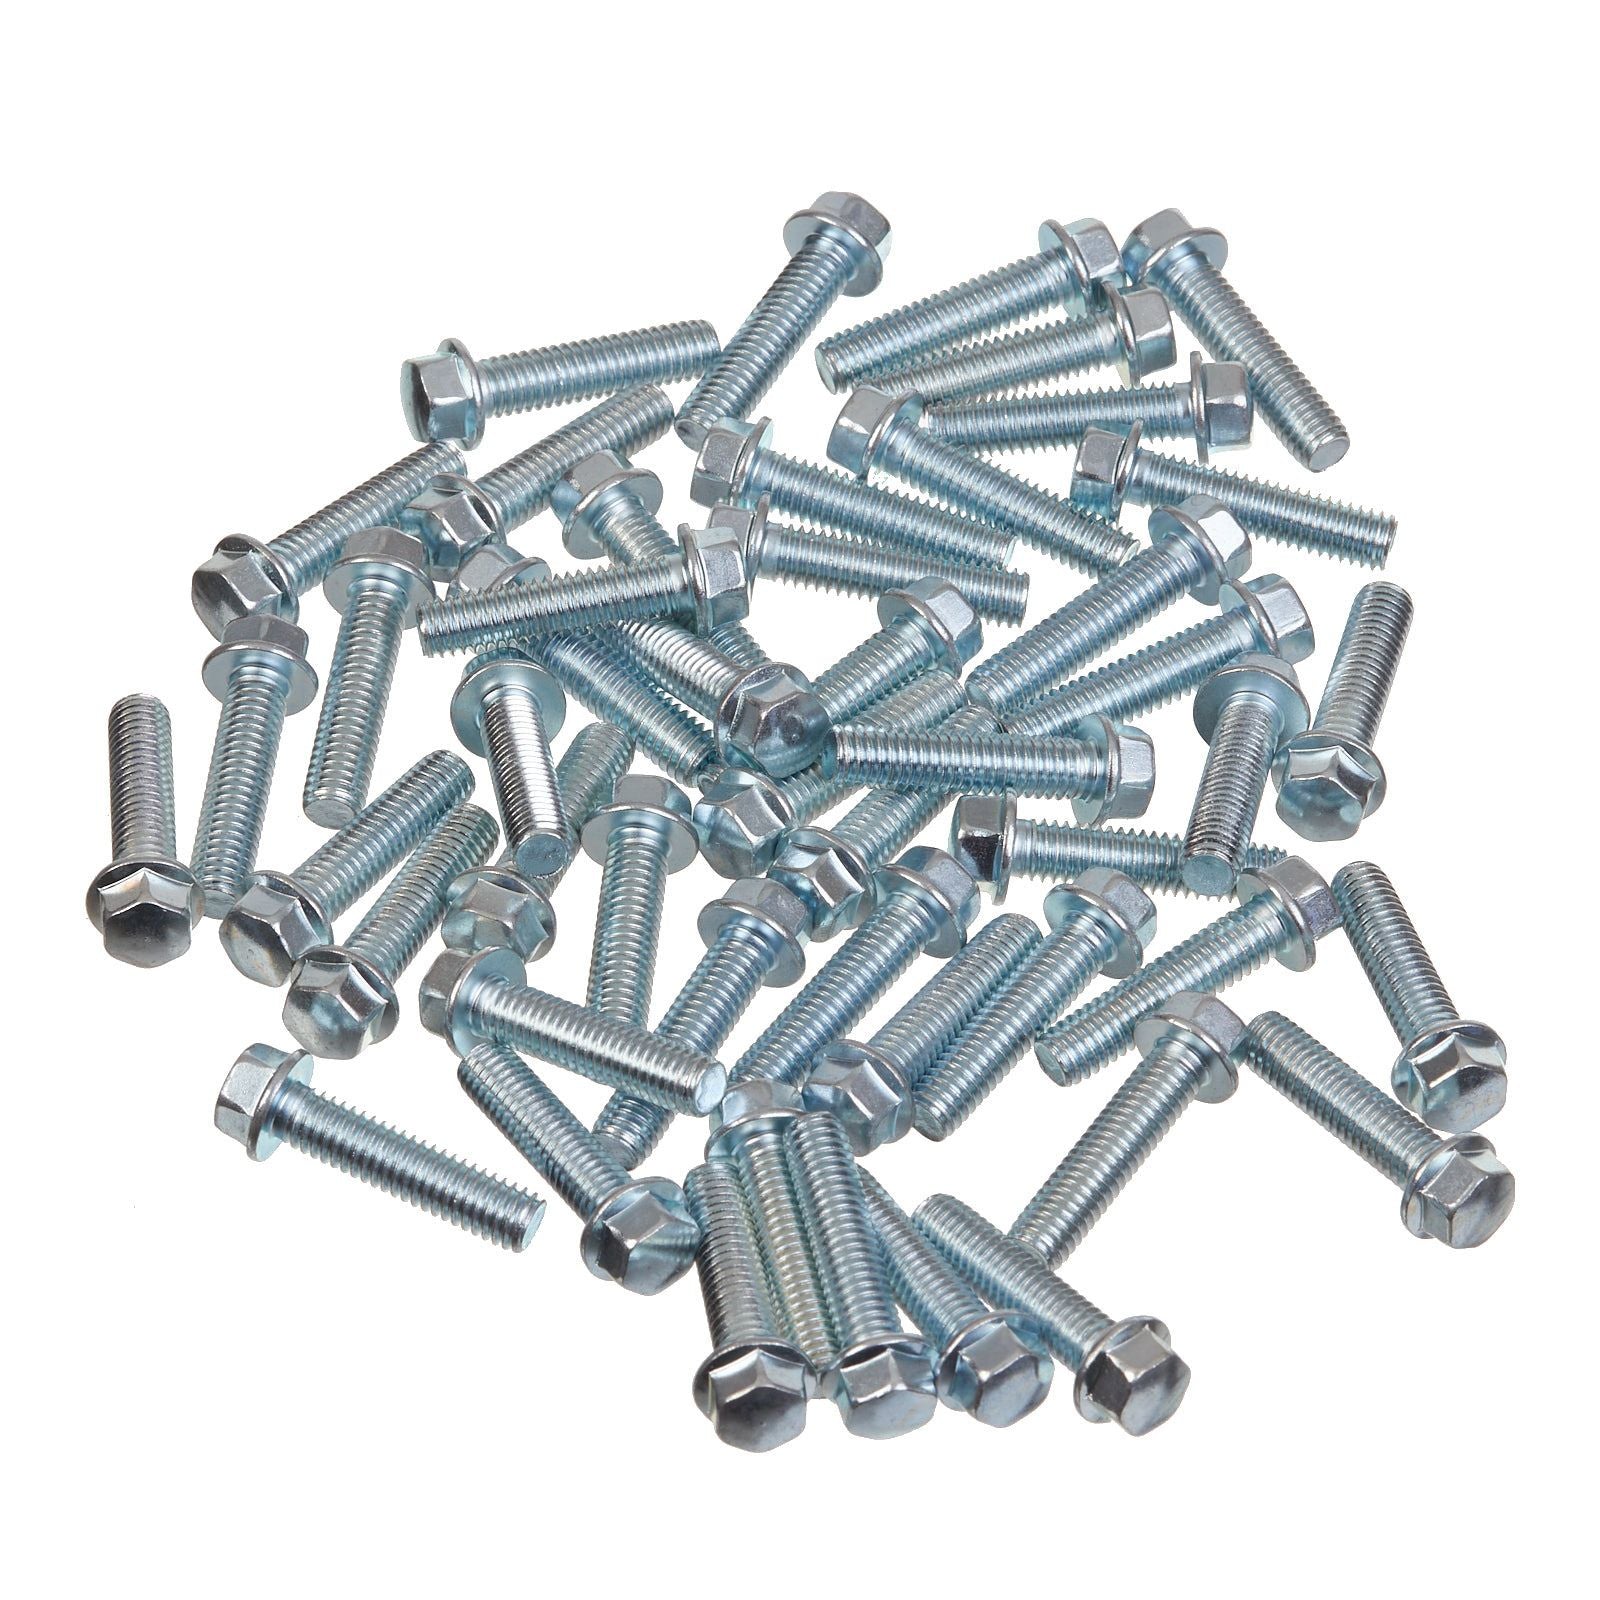 New WHITES Motorcycle Bolt Flange - 6 x 25mm (50 Pack) #HWFB6X25